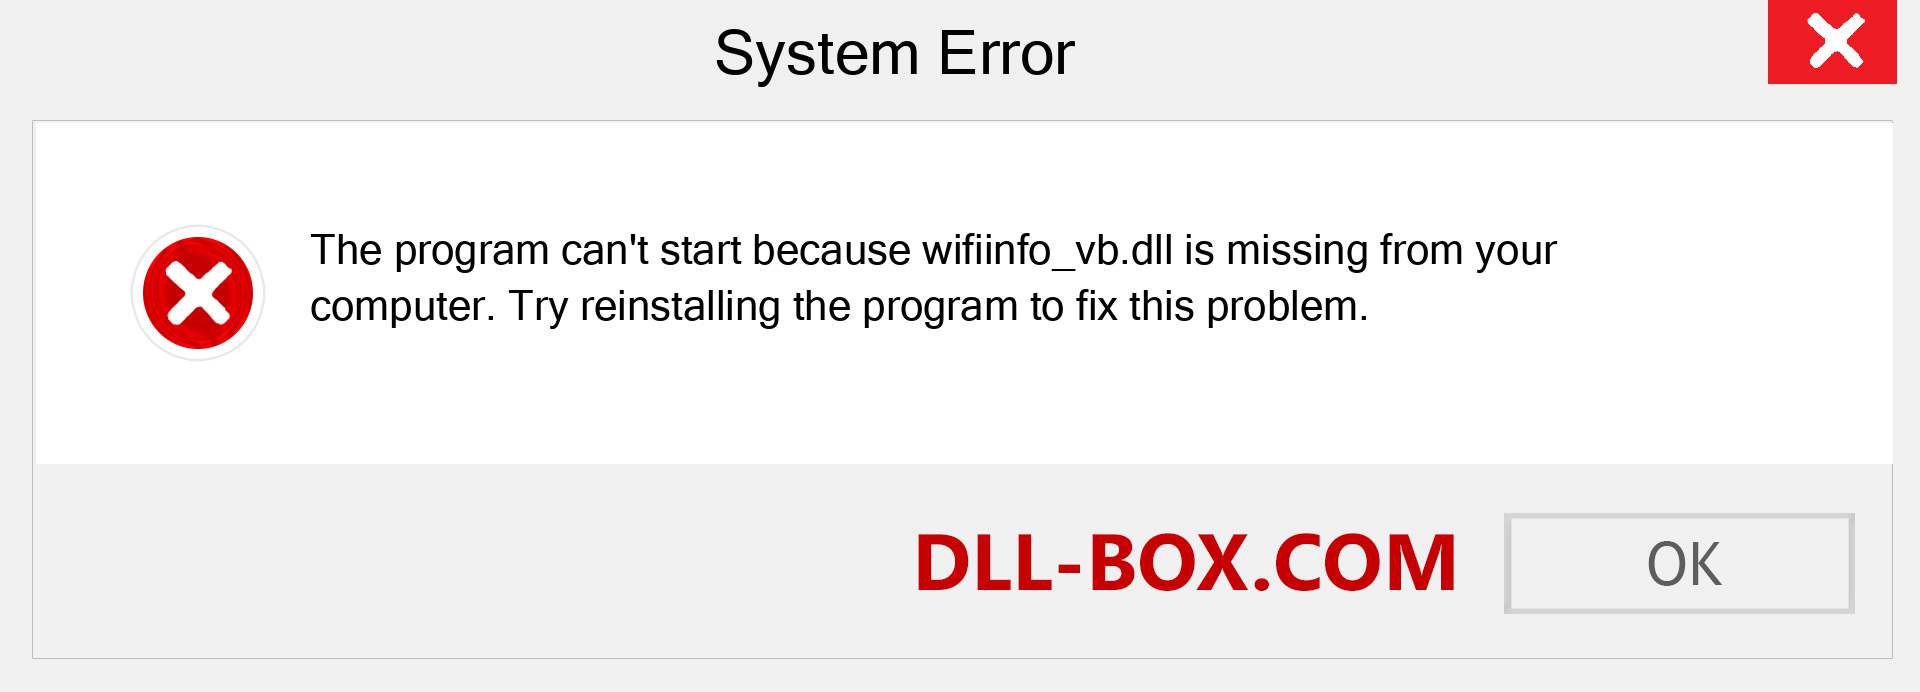  wifiinfo_vb.dll file is missing?. Download for Windows 7, 8, 10 - Fix  wifiinfo_vb dll Missing Error on Windows, photos, images